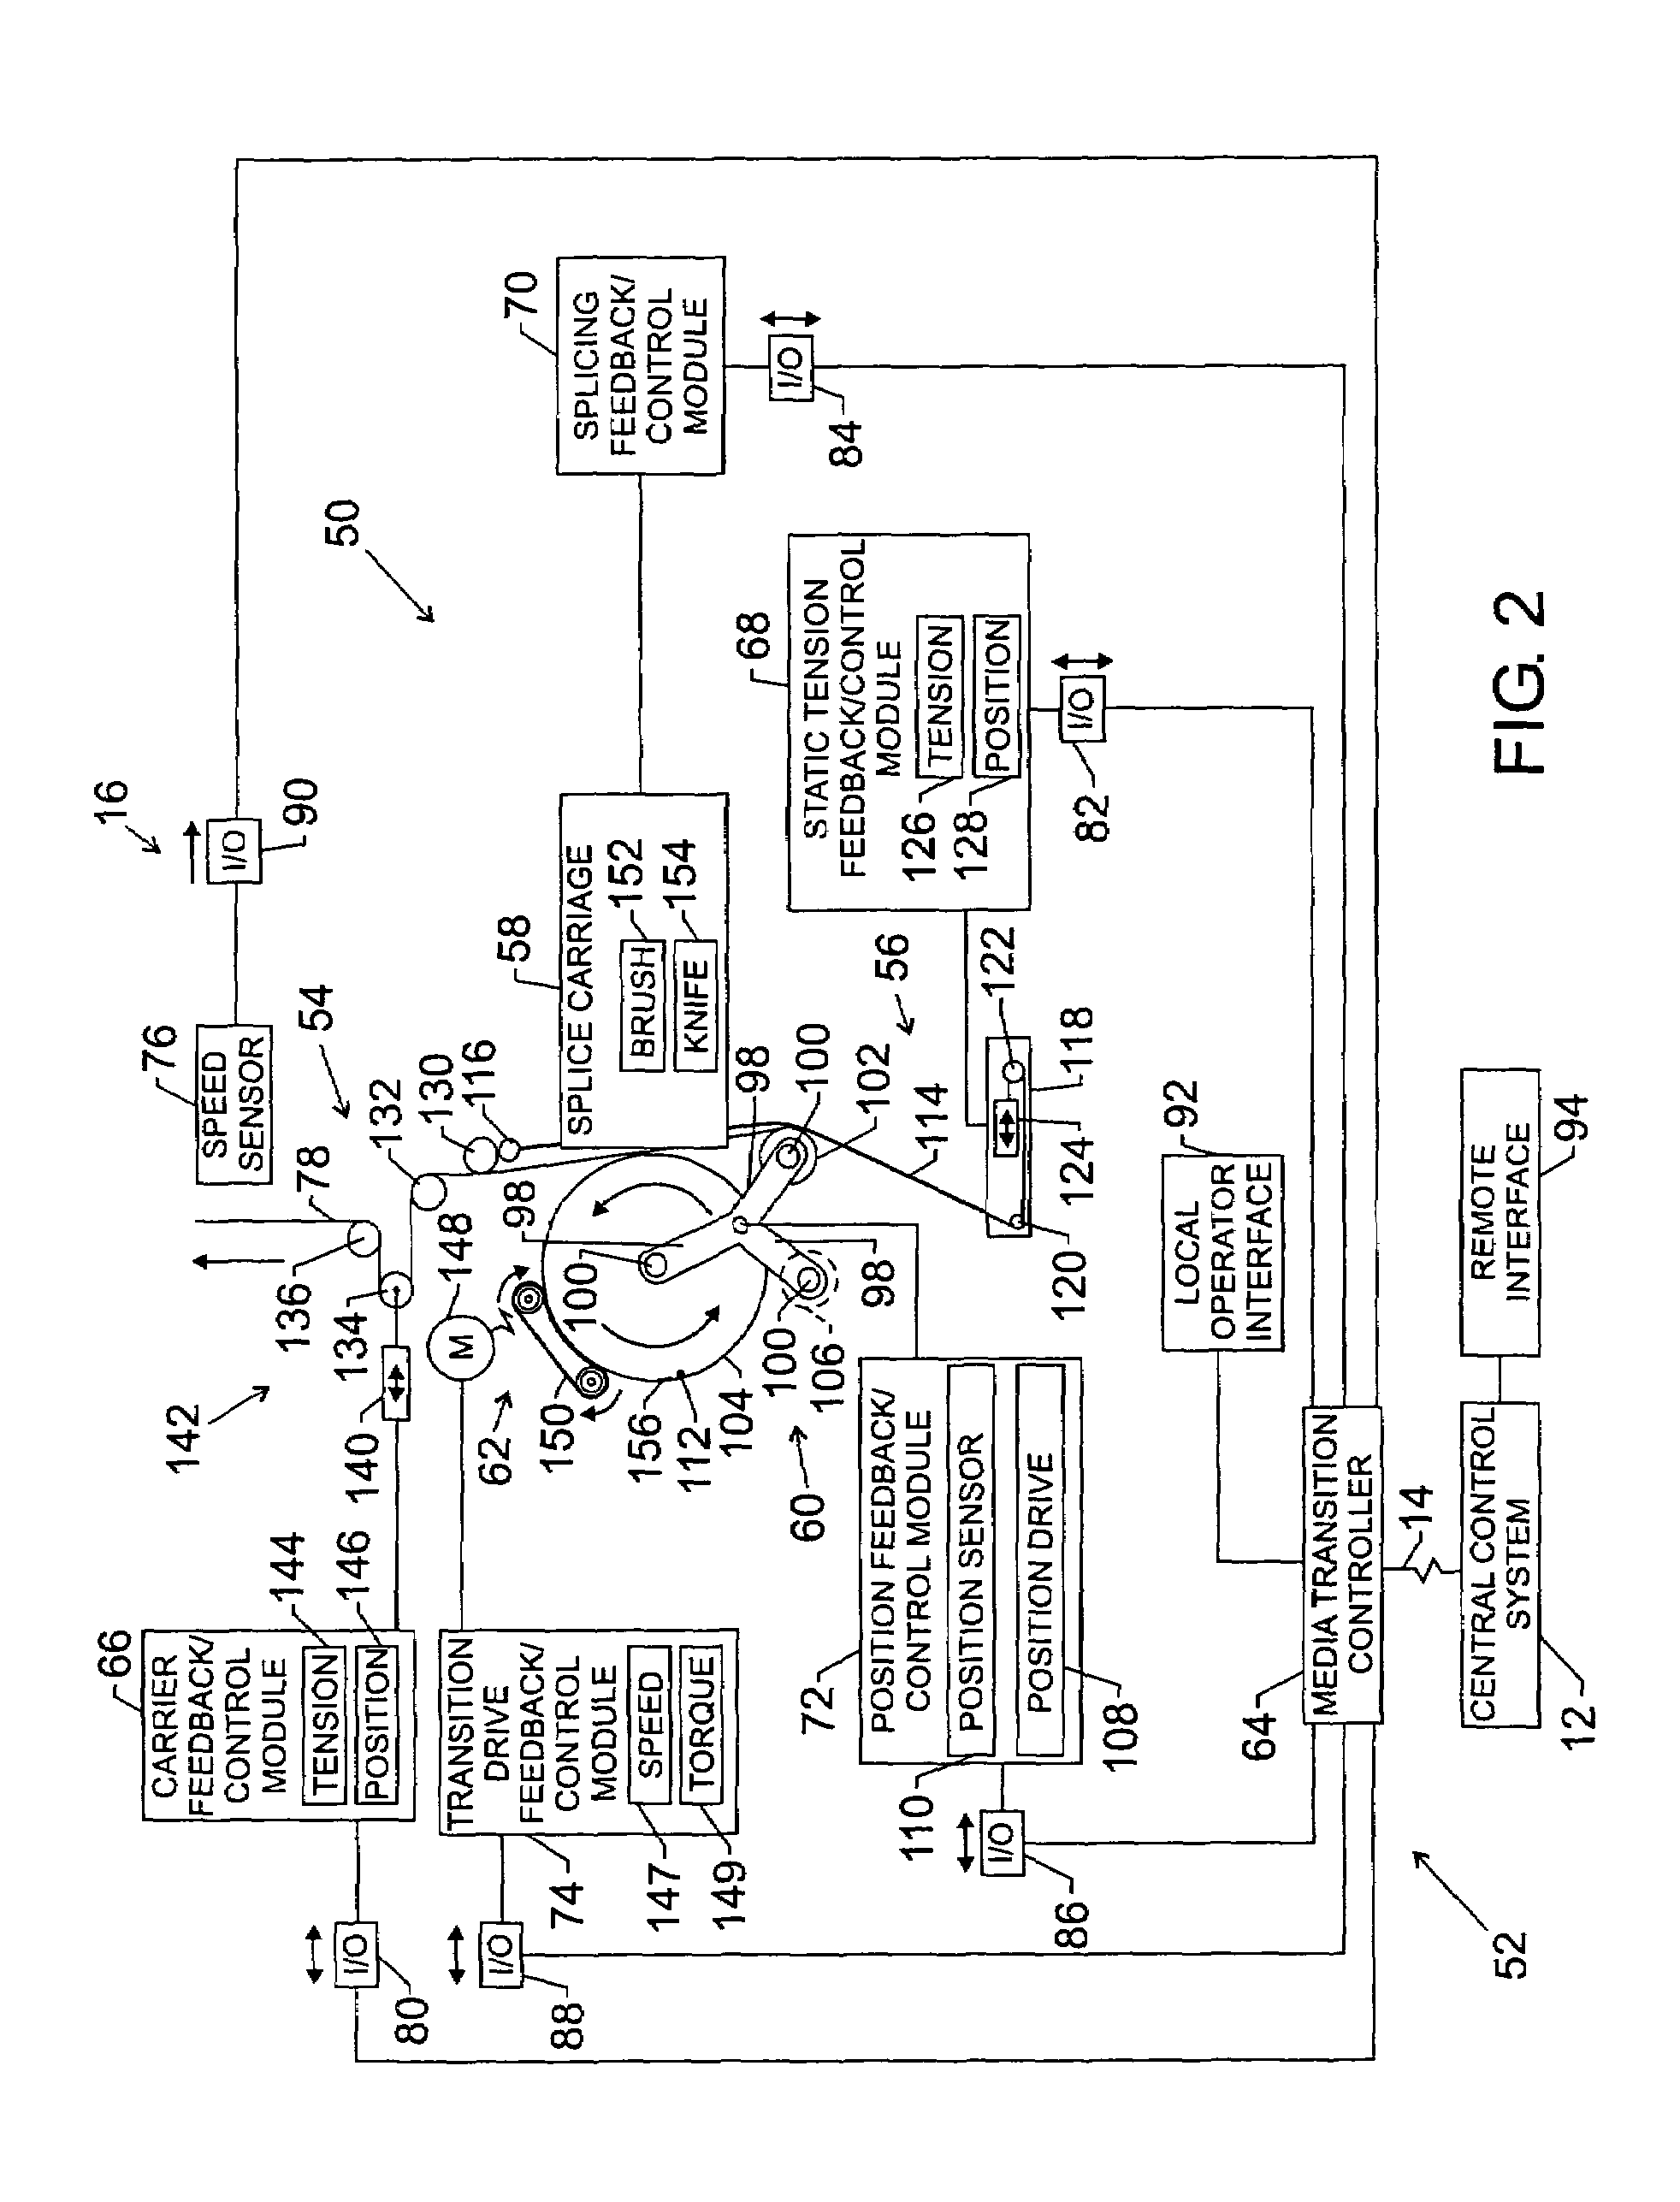 Reeled material splicing method and apparatus